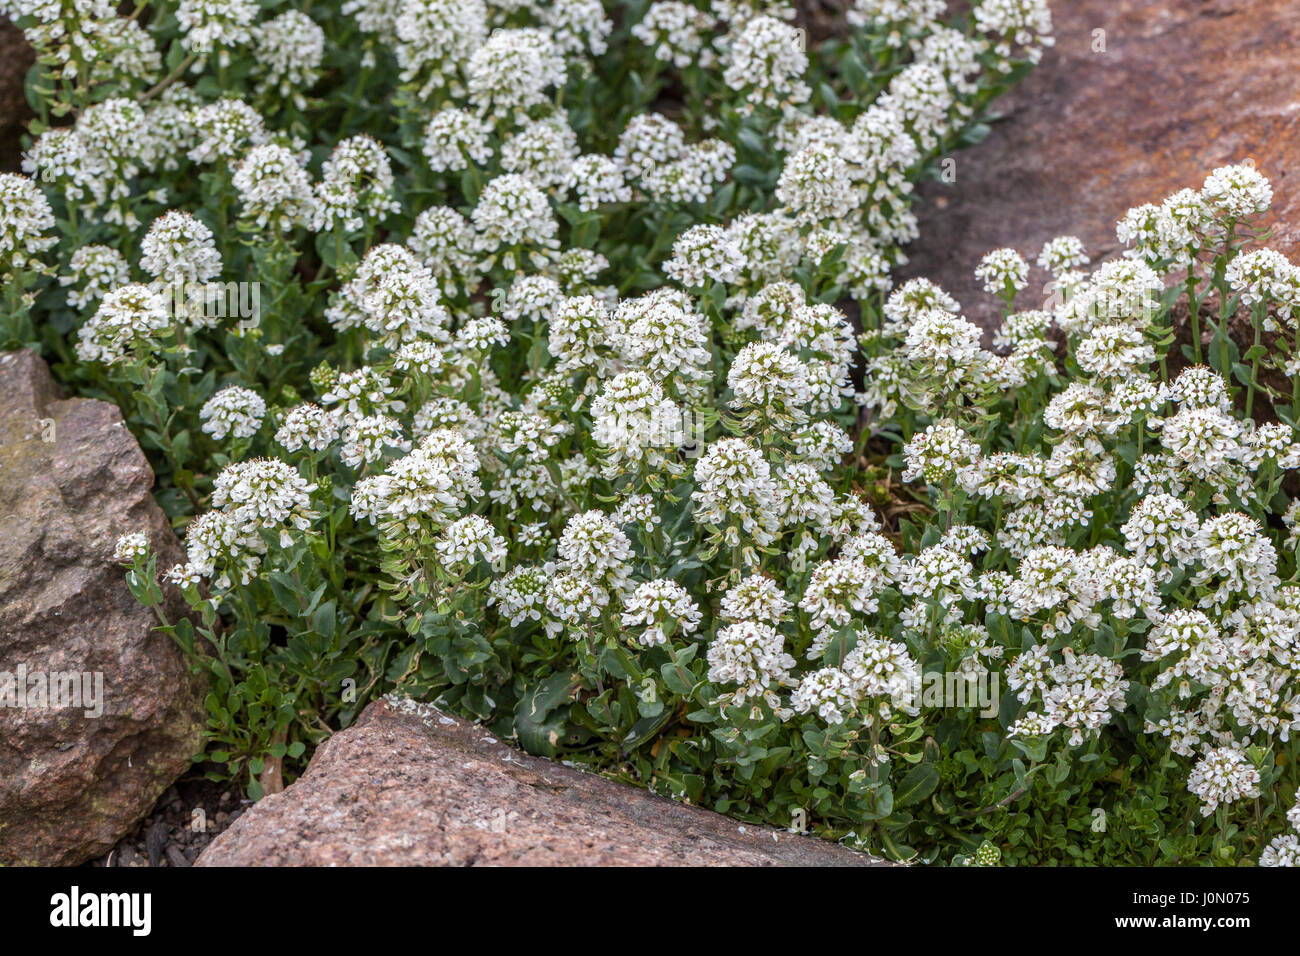 Pennycress, Thlaspi minimo Foto Stock